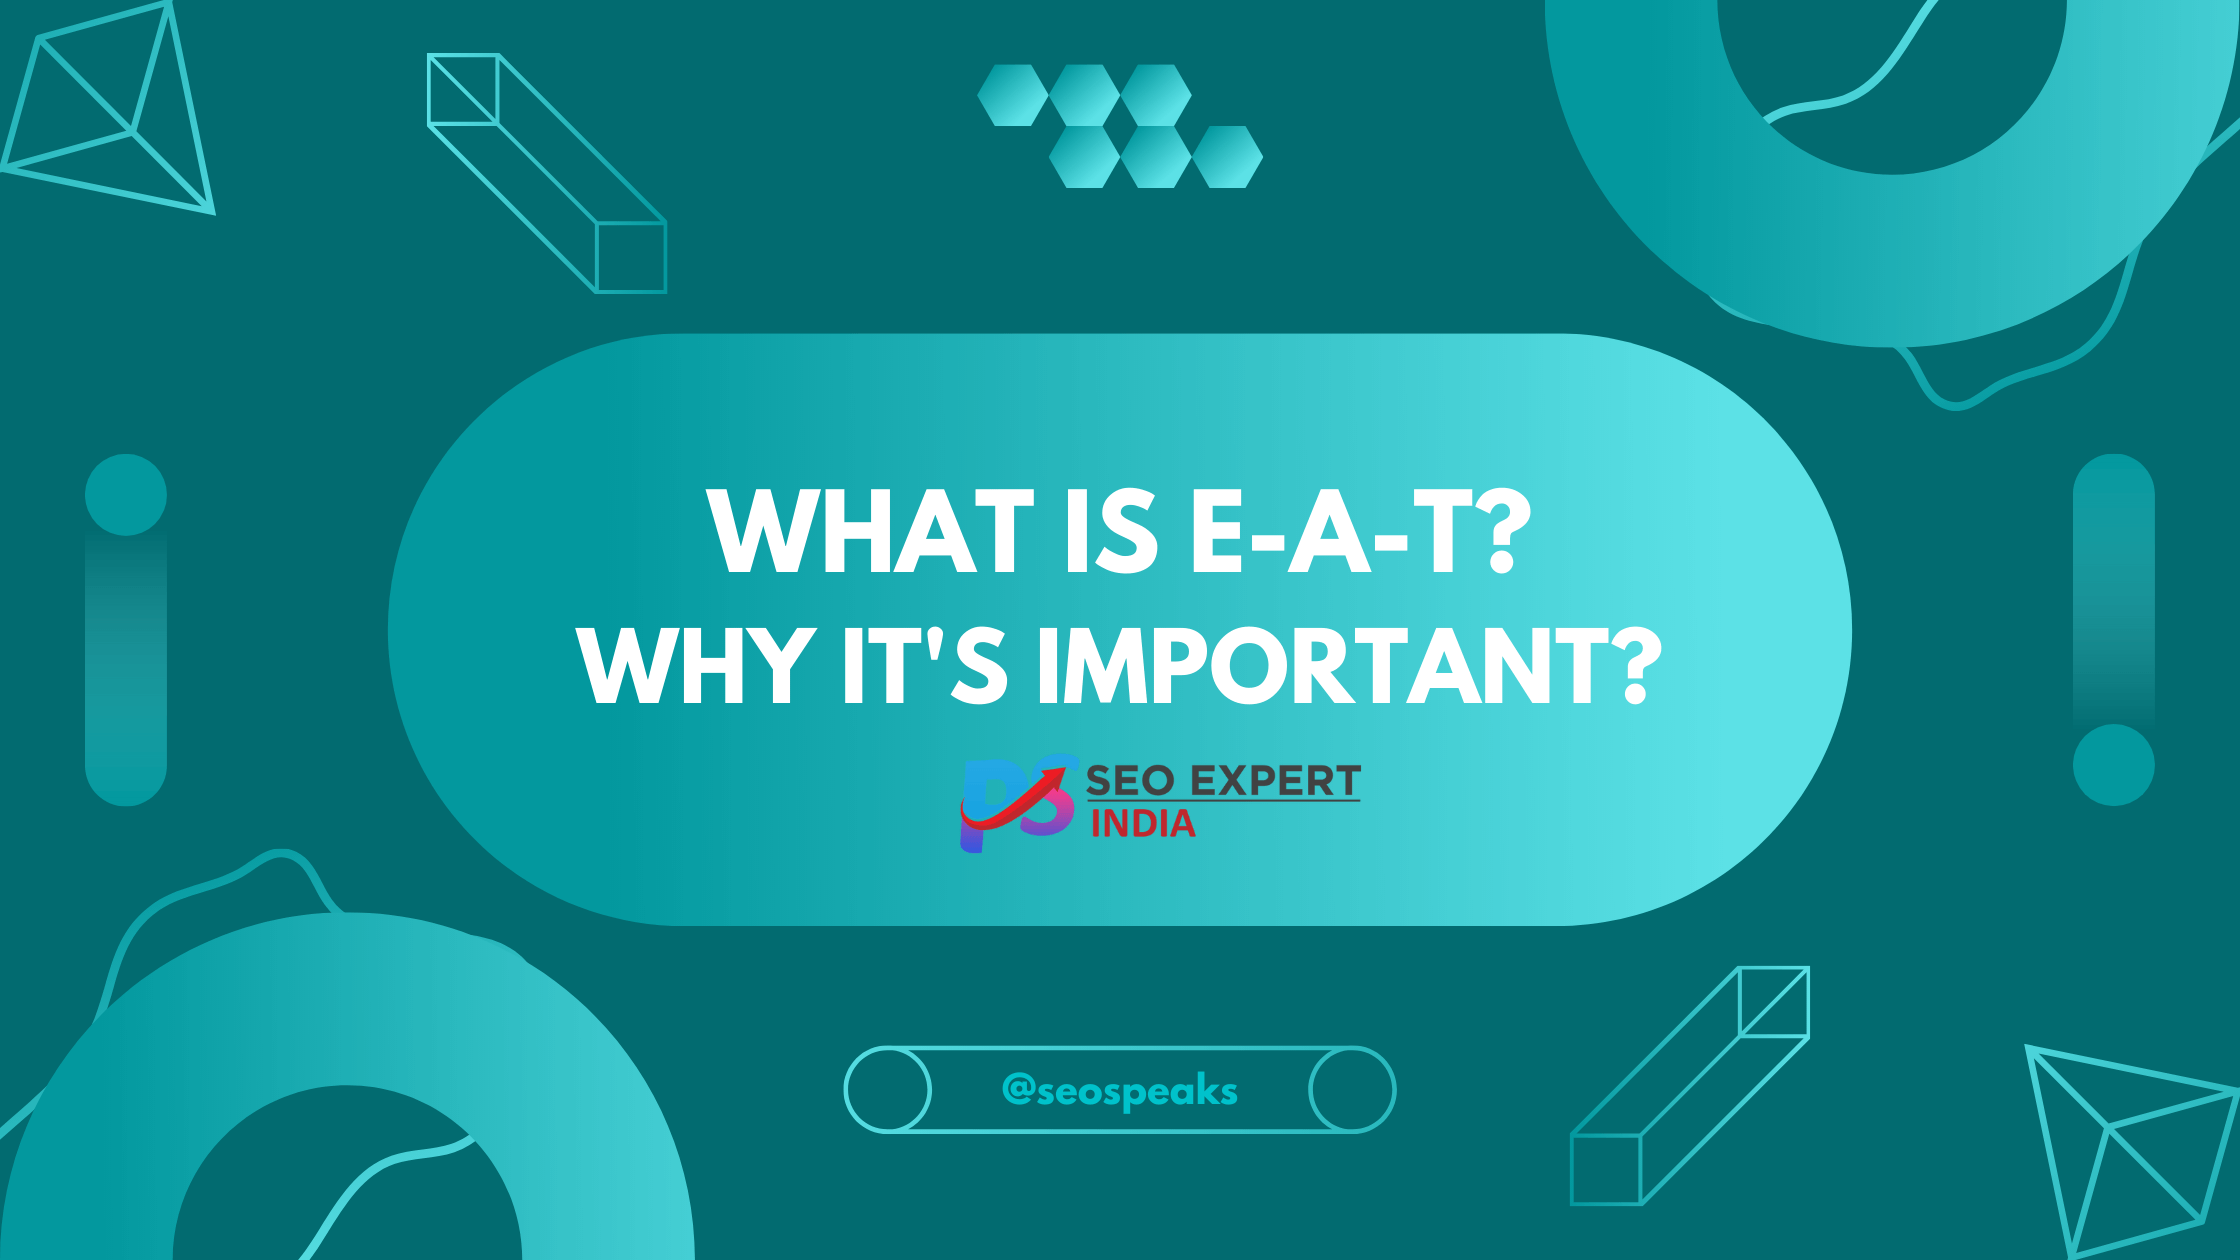 What is EAT in SEO